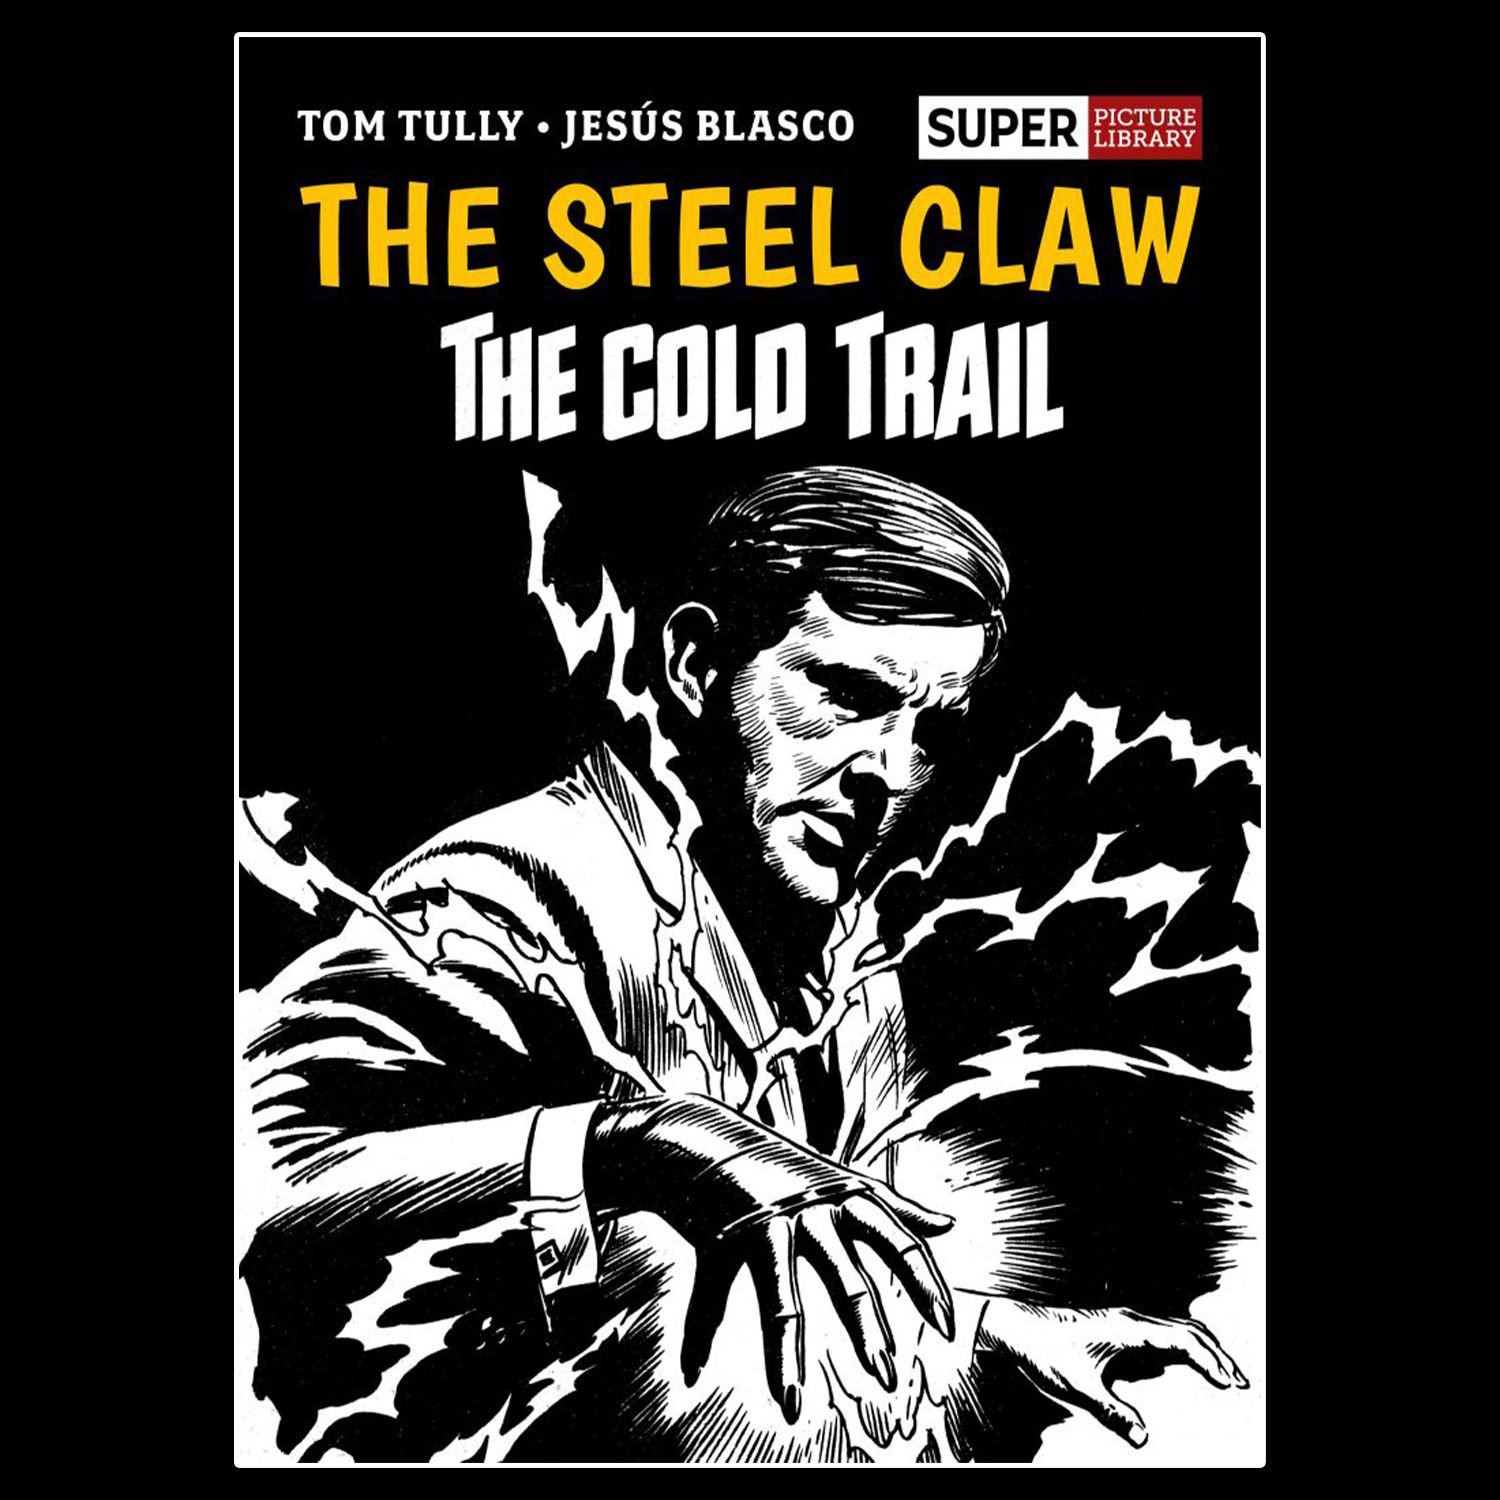 OUT NOW: The Steel Claw: The Cold Trail